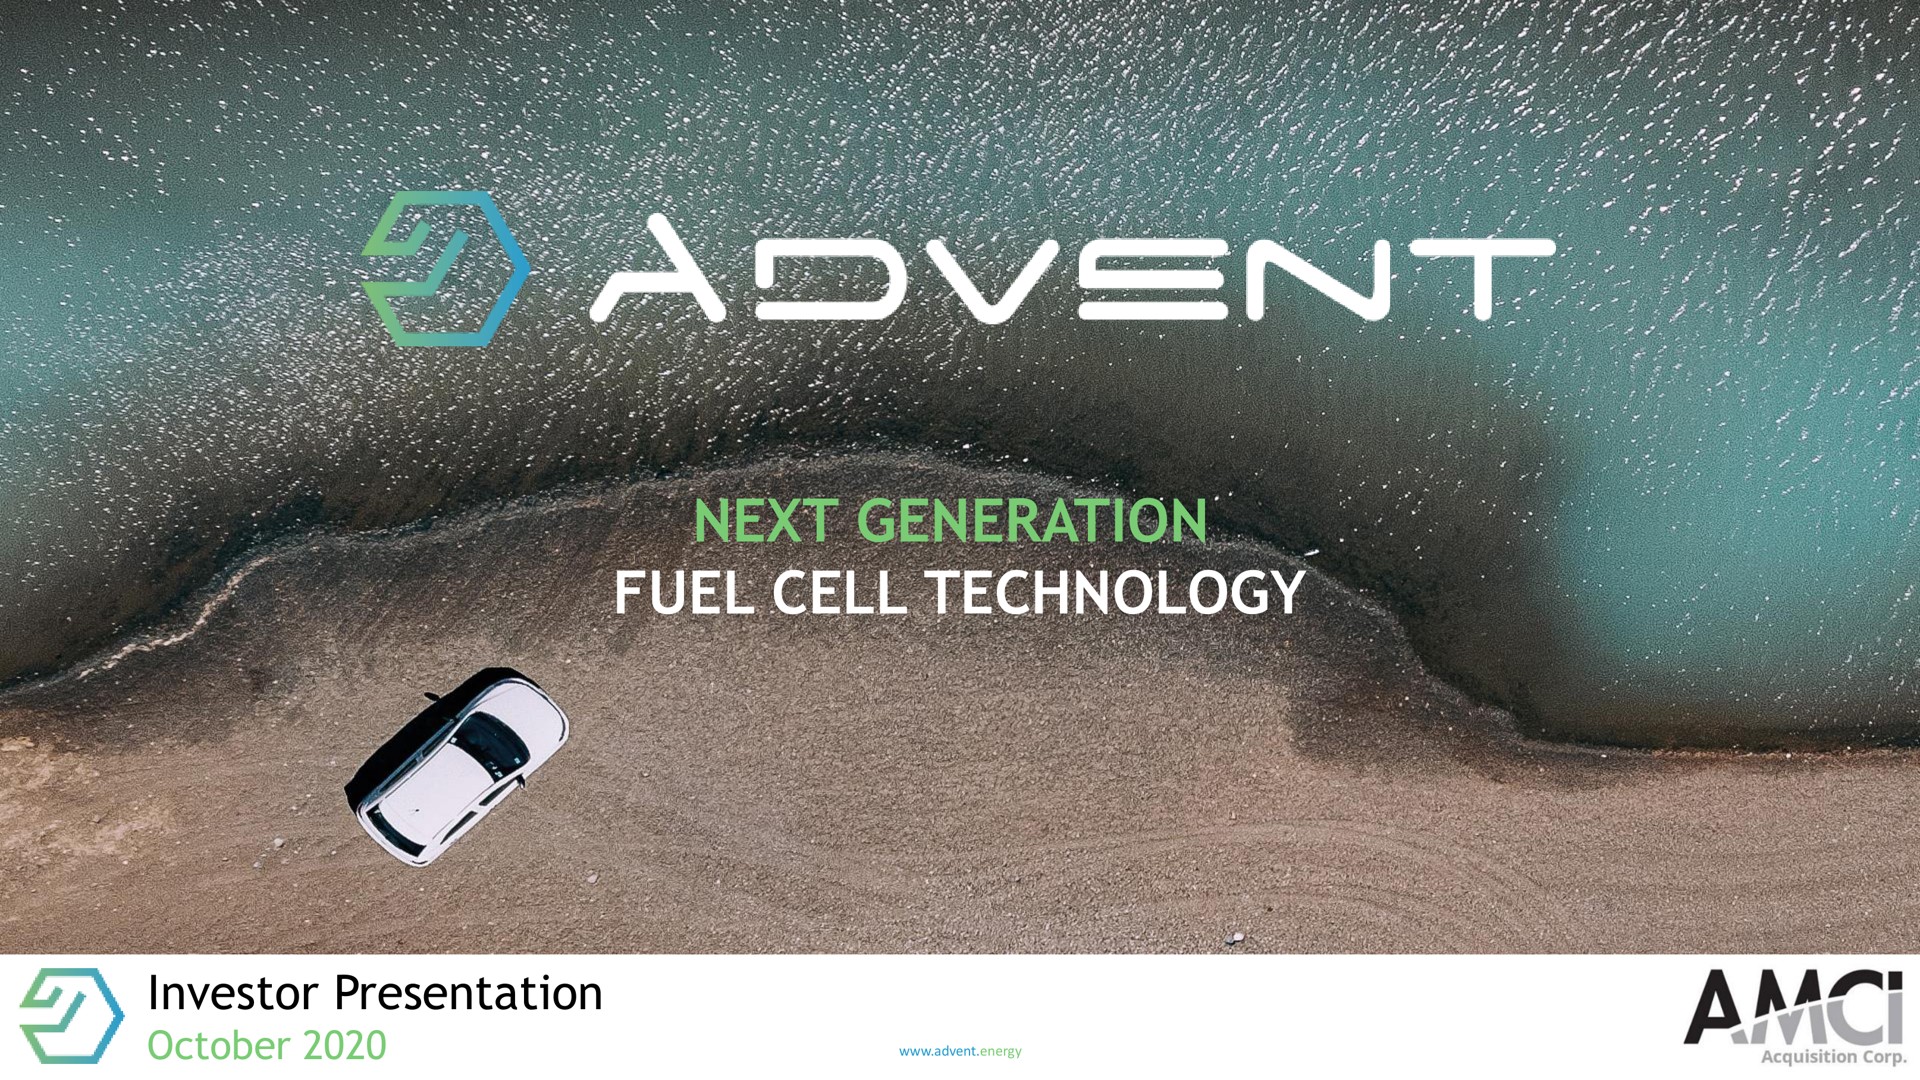 next generation fuel cell technology investor presentation ology acquisition corp | Advent